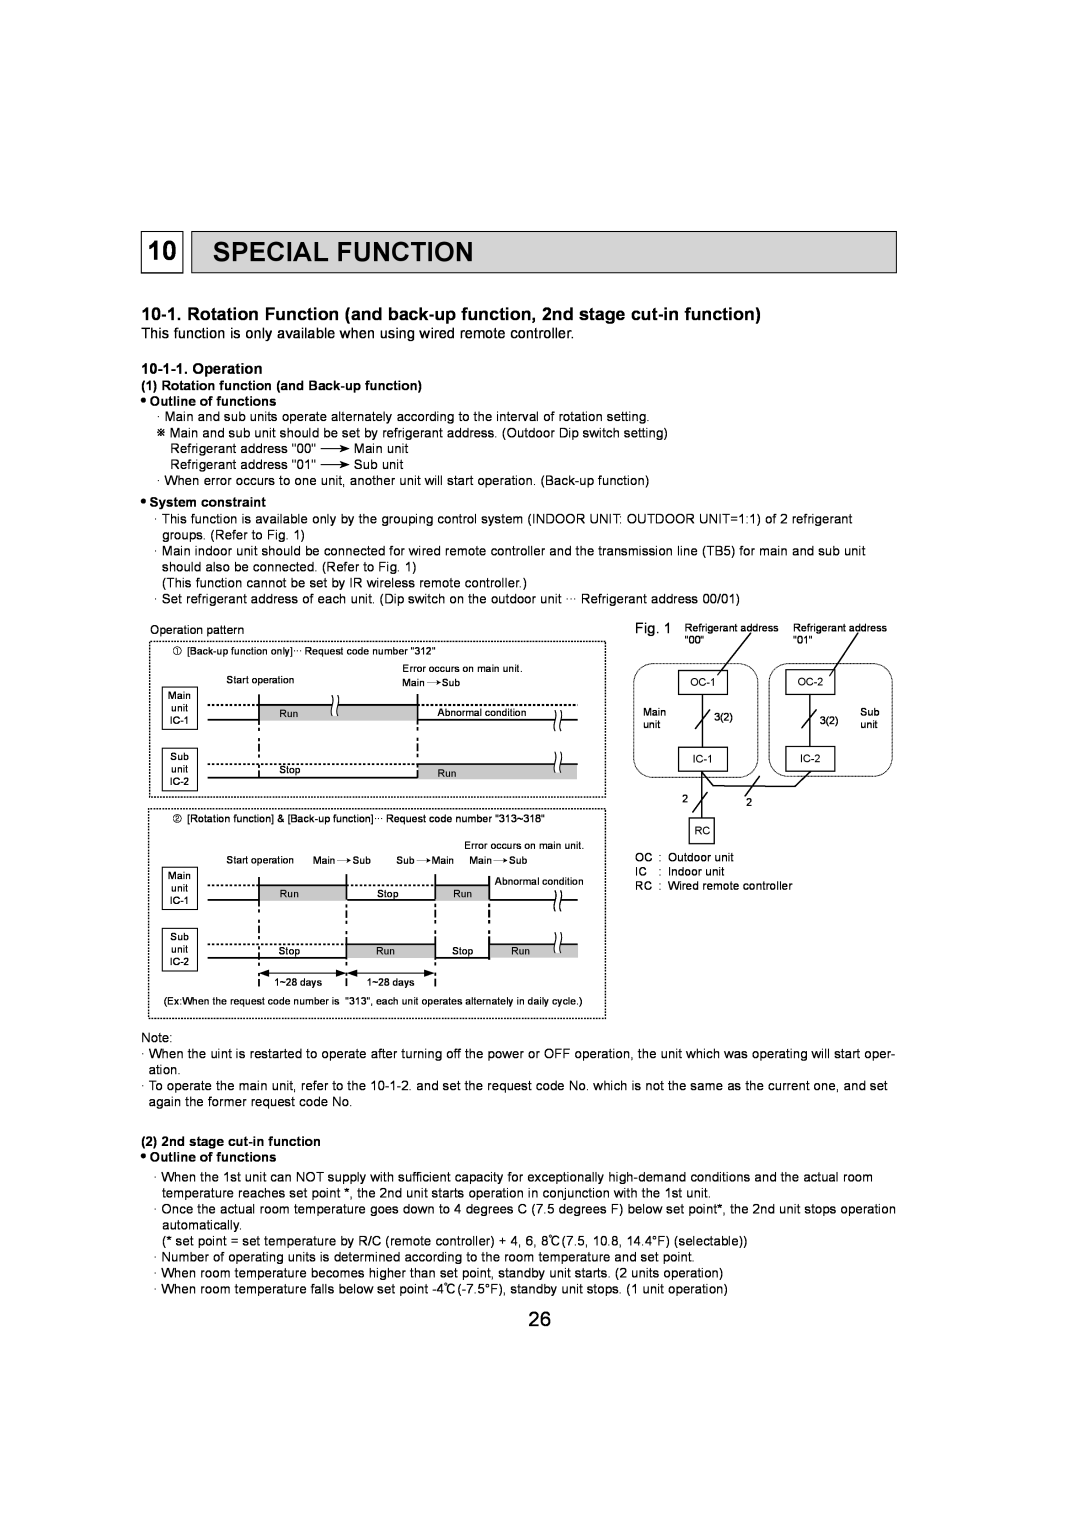 Mitsumi electronic PKA-A12HA4, PKA-A18HA4 service manual Special Function, Operation, System constraint 